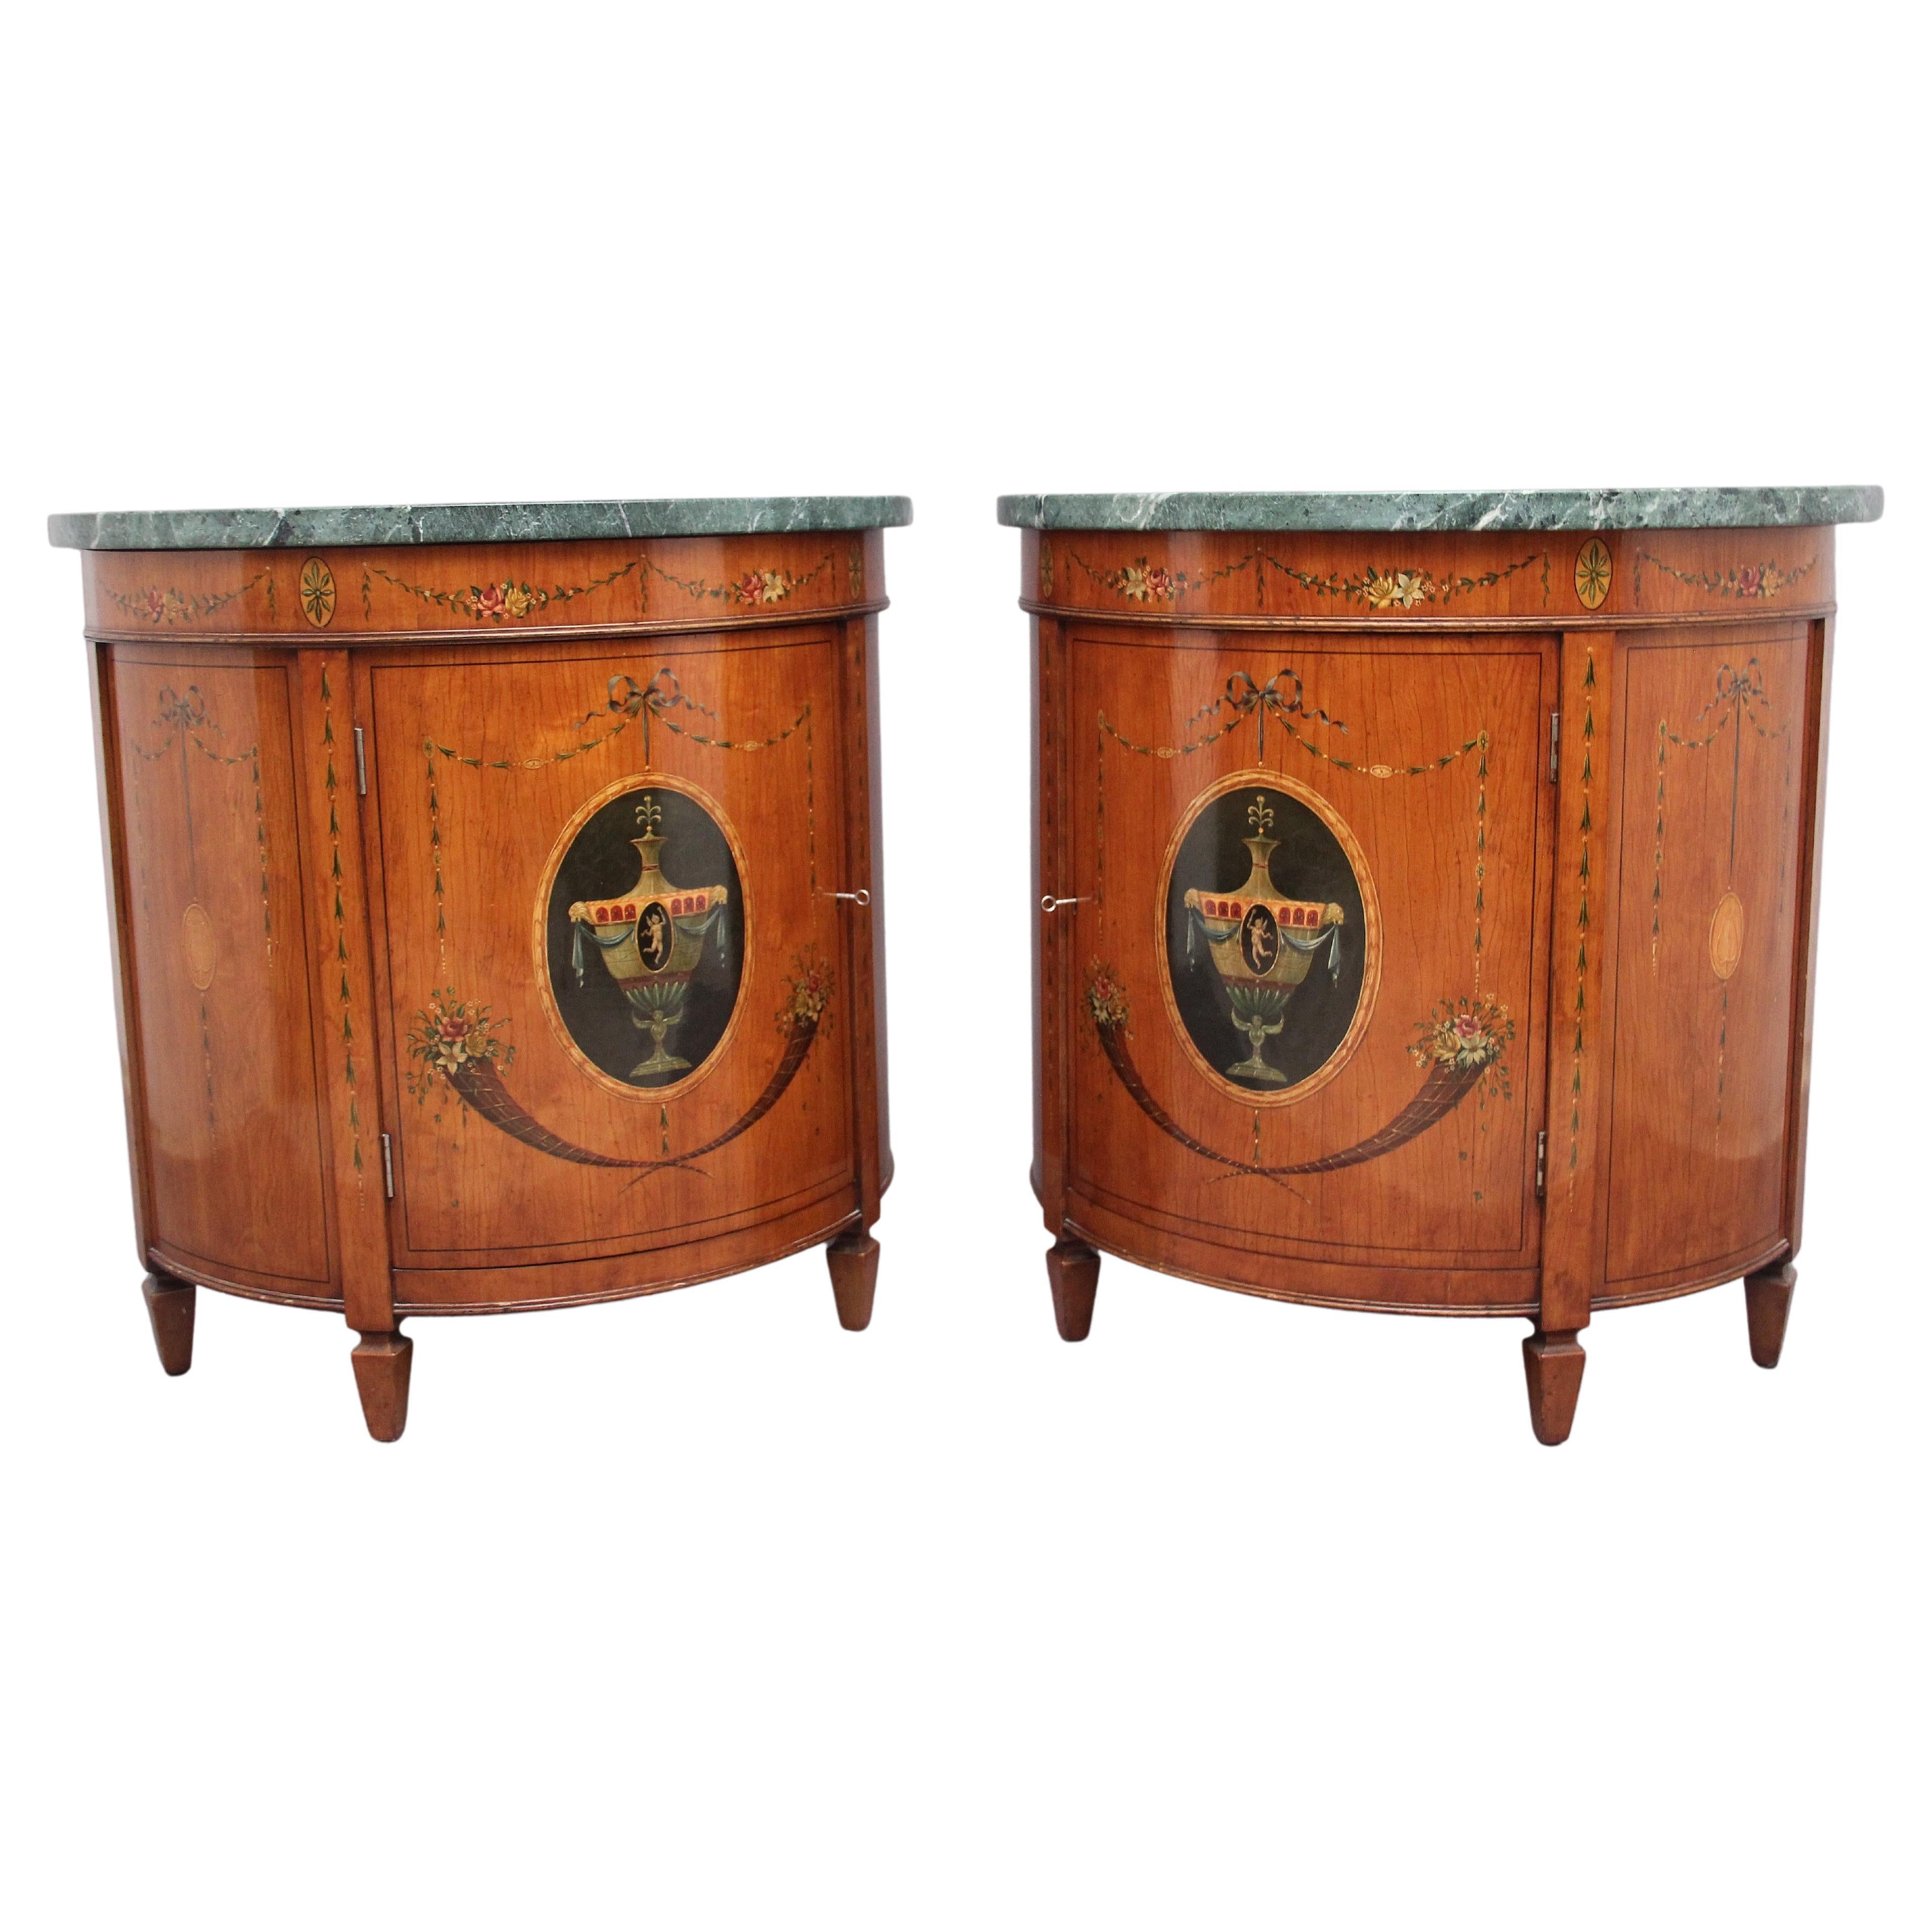 Pair of Early 20th Century Satinwood and Painted Demi Lune Cabinets For Sale